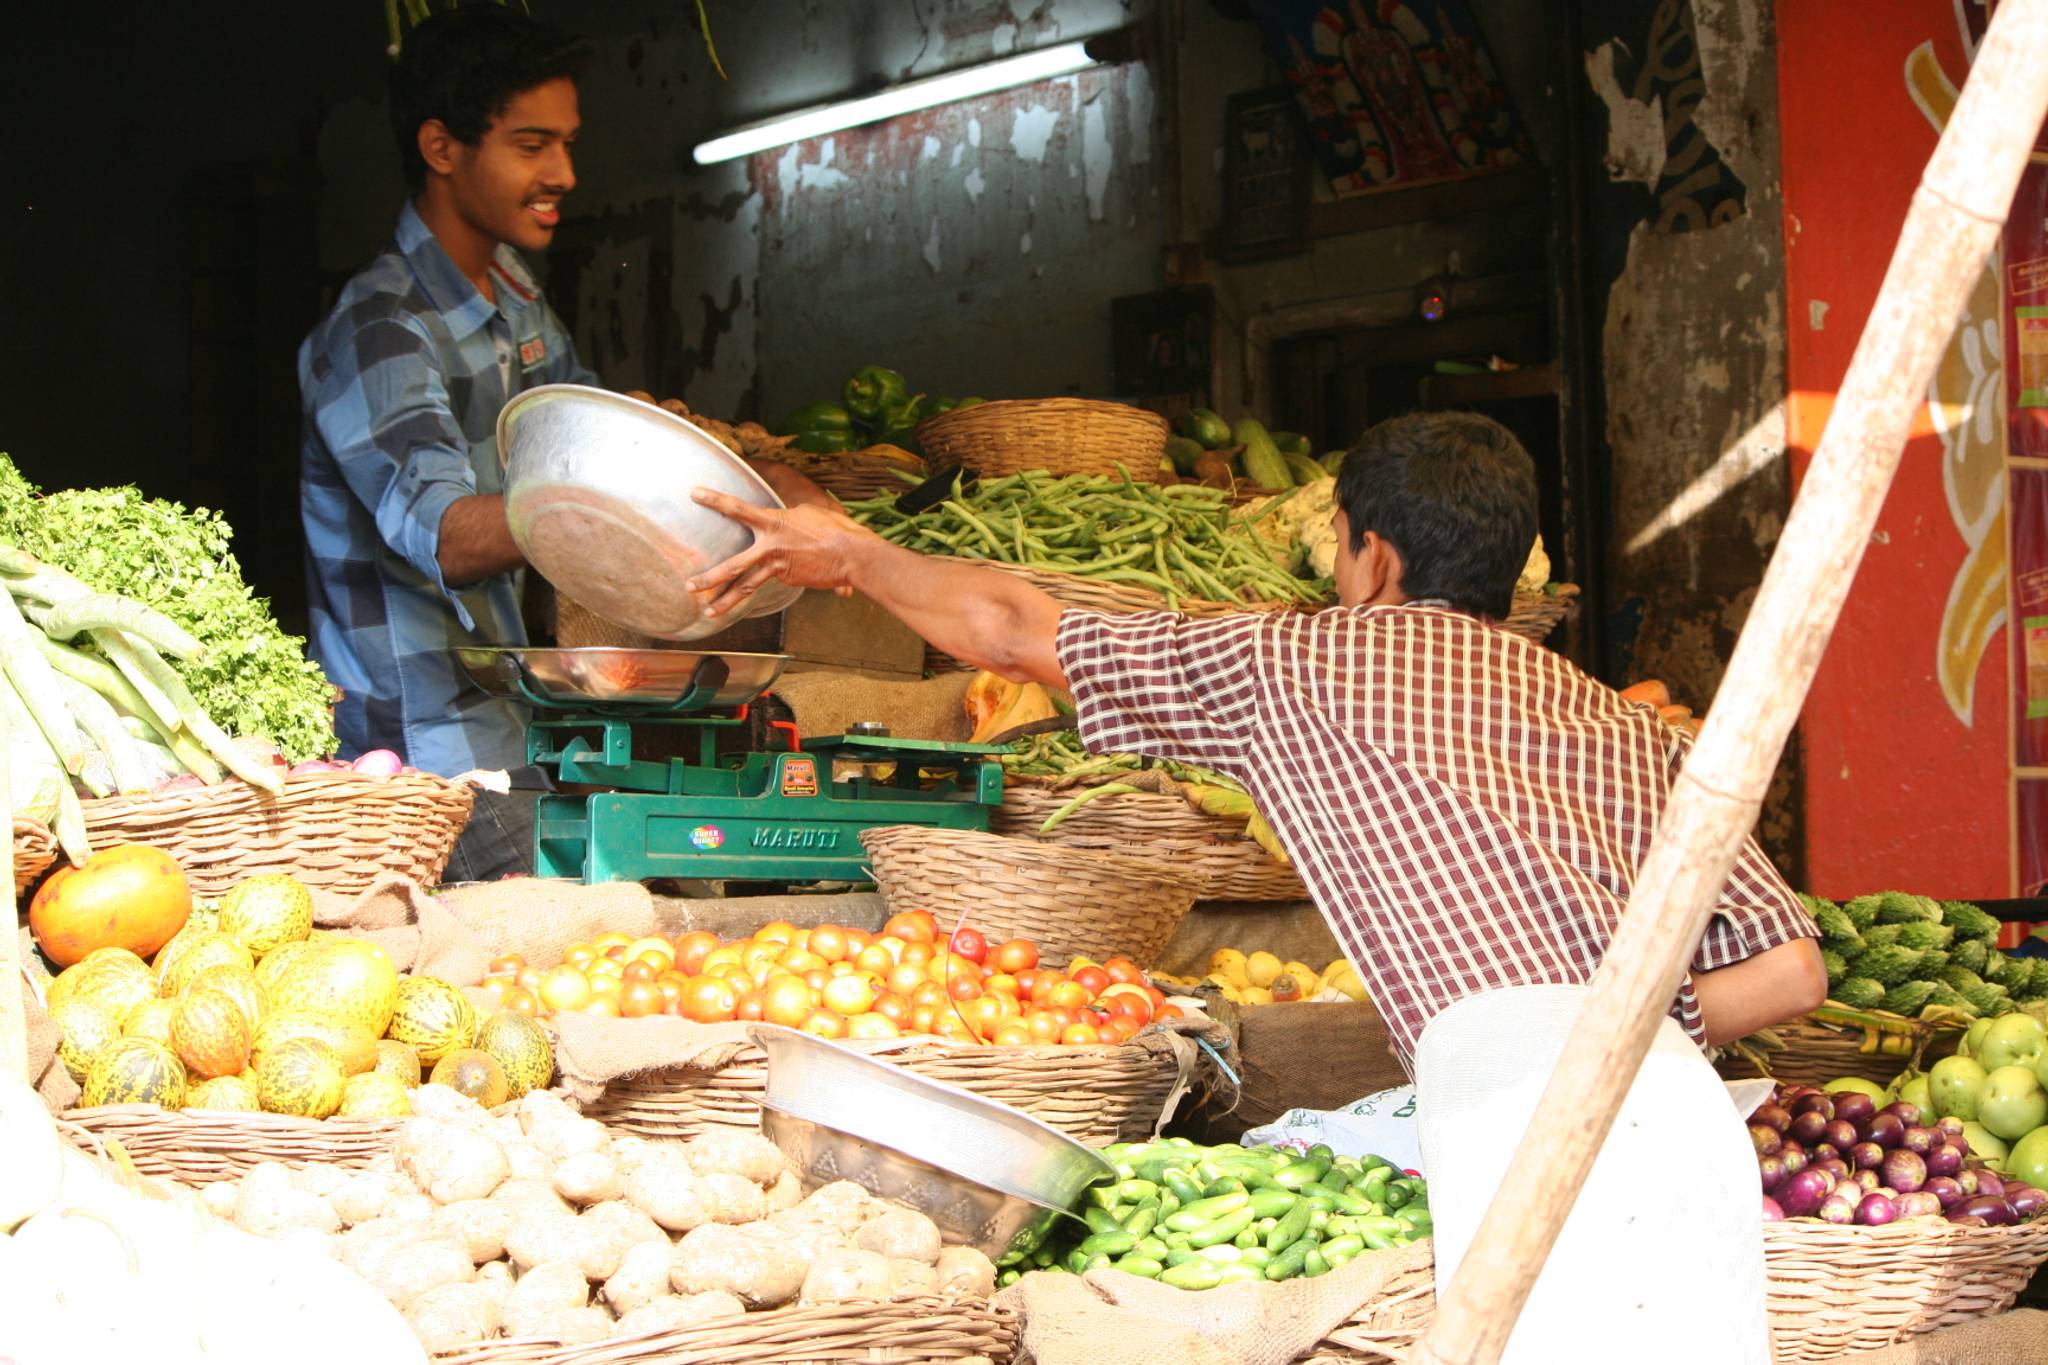 Indians are willing to pay more for healthy food